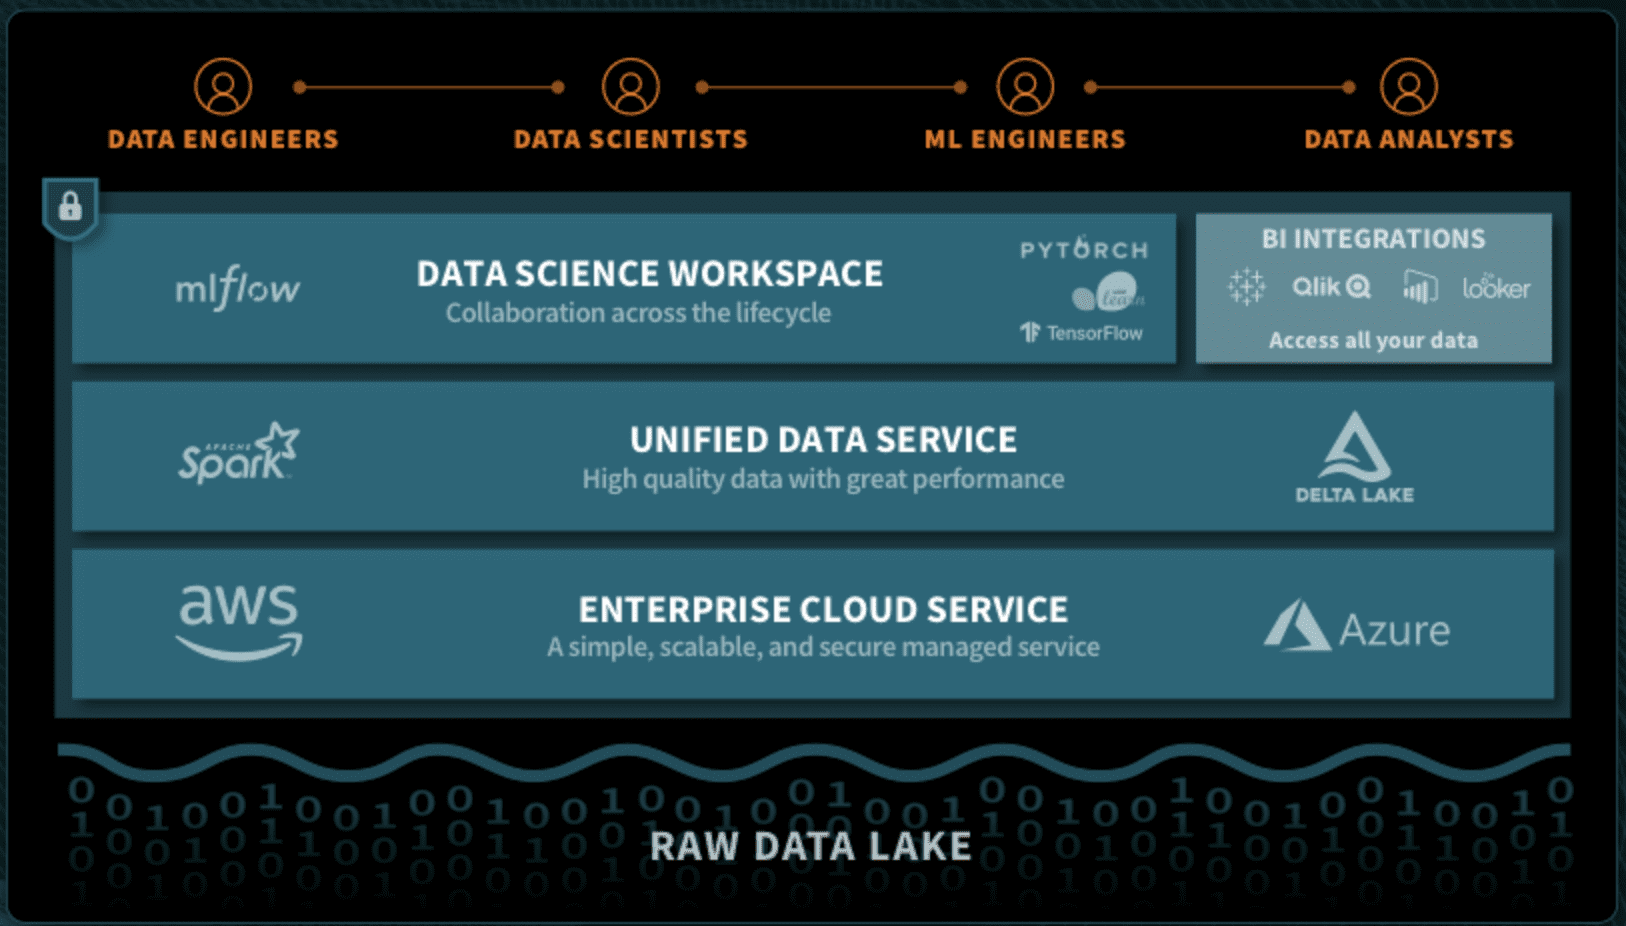 Databricks Unified Data Analytics Platform simplifies data access and engineering, while fostering a collaborative environment that supports analytics and machine learning driven innovation.